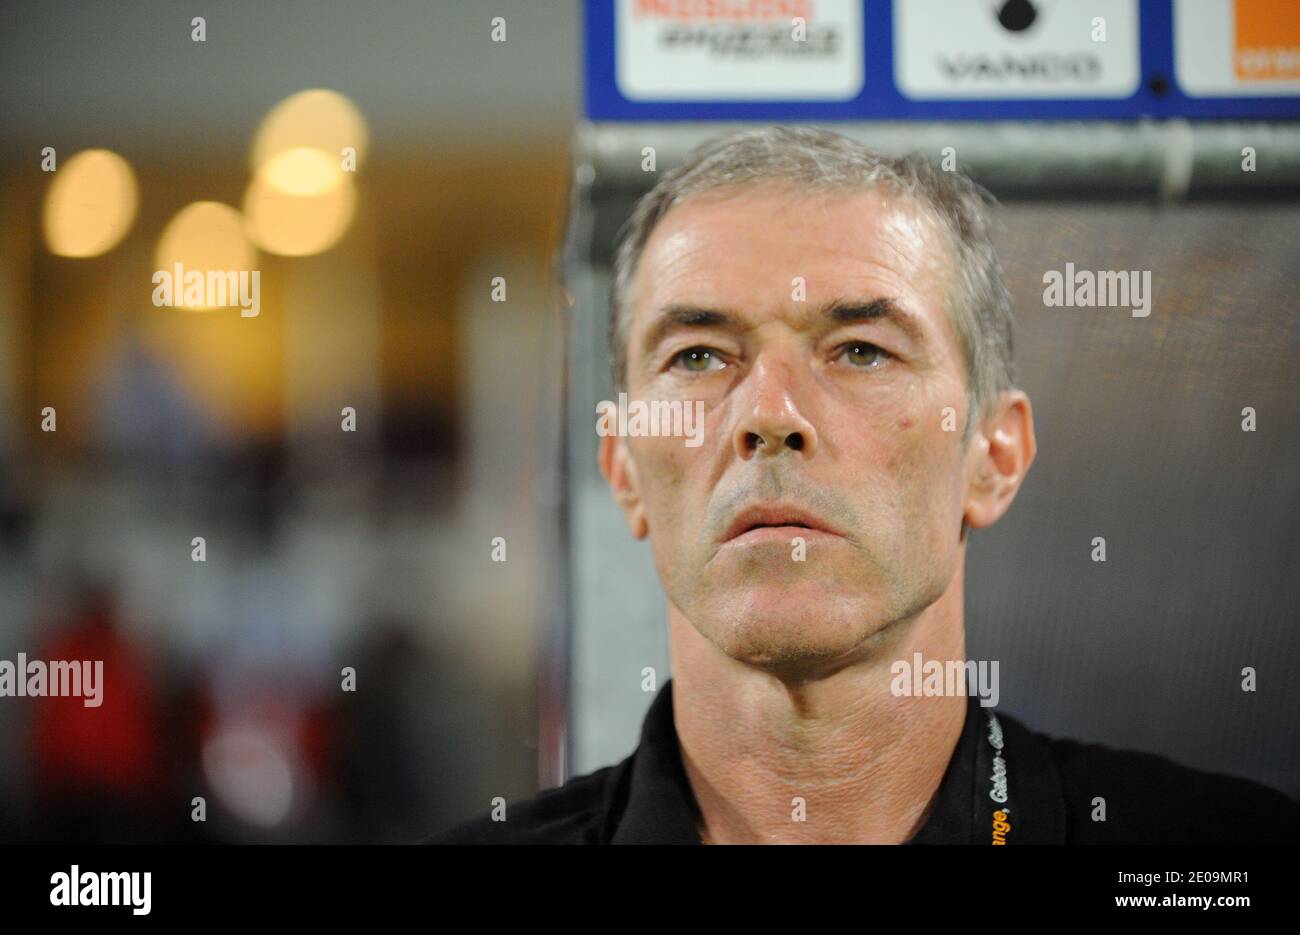 Guinean national football team coach Michel Dussuyer during the 2012 African Cup of Nations soccer match, Ghana Vs Equatorial Guinea in Franceville, Gabon on February 2, 2012. The match ended in a 1-1 draw. Photo by ABACAPRESS.COM Stock Photo